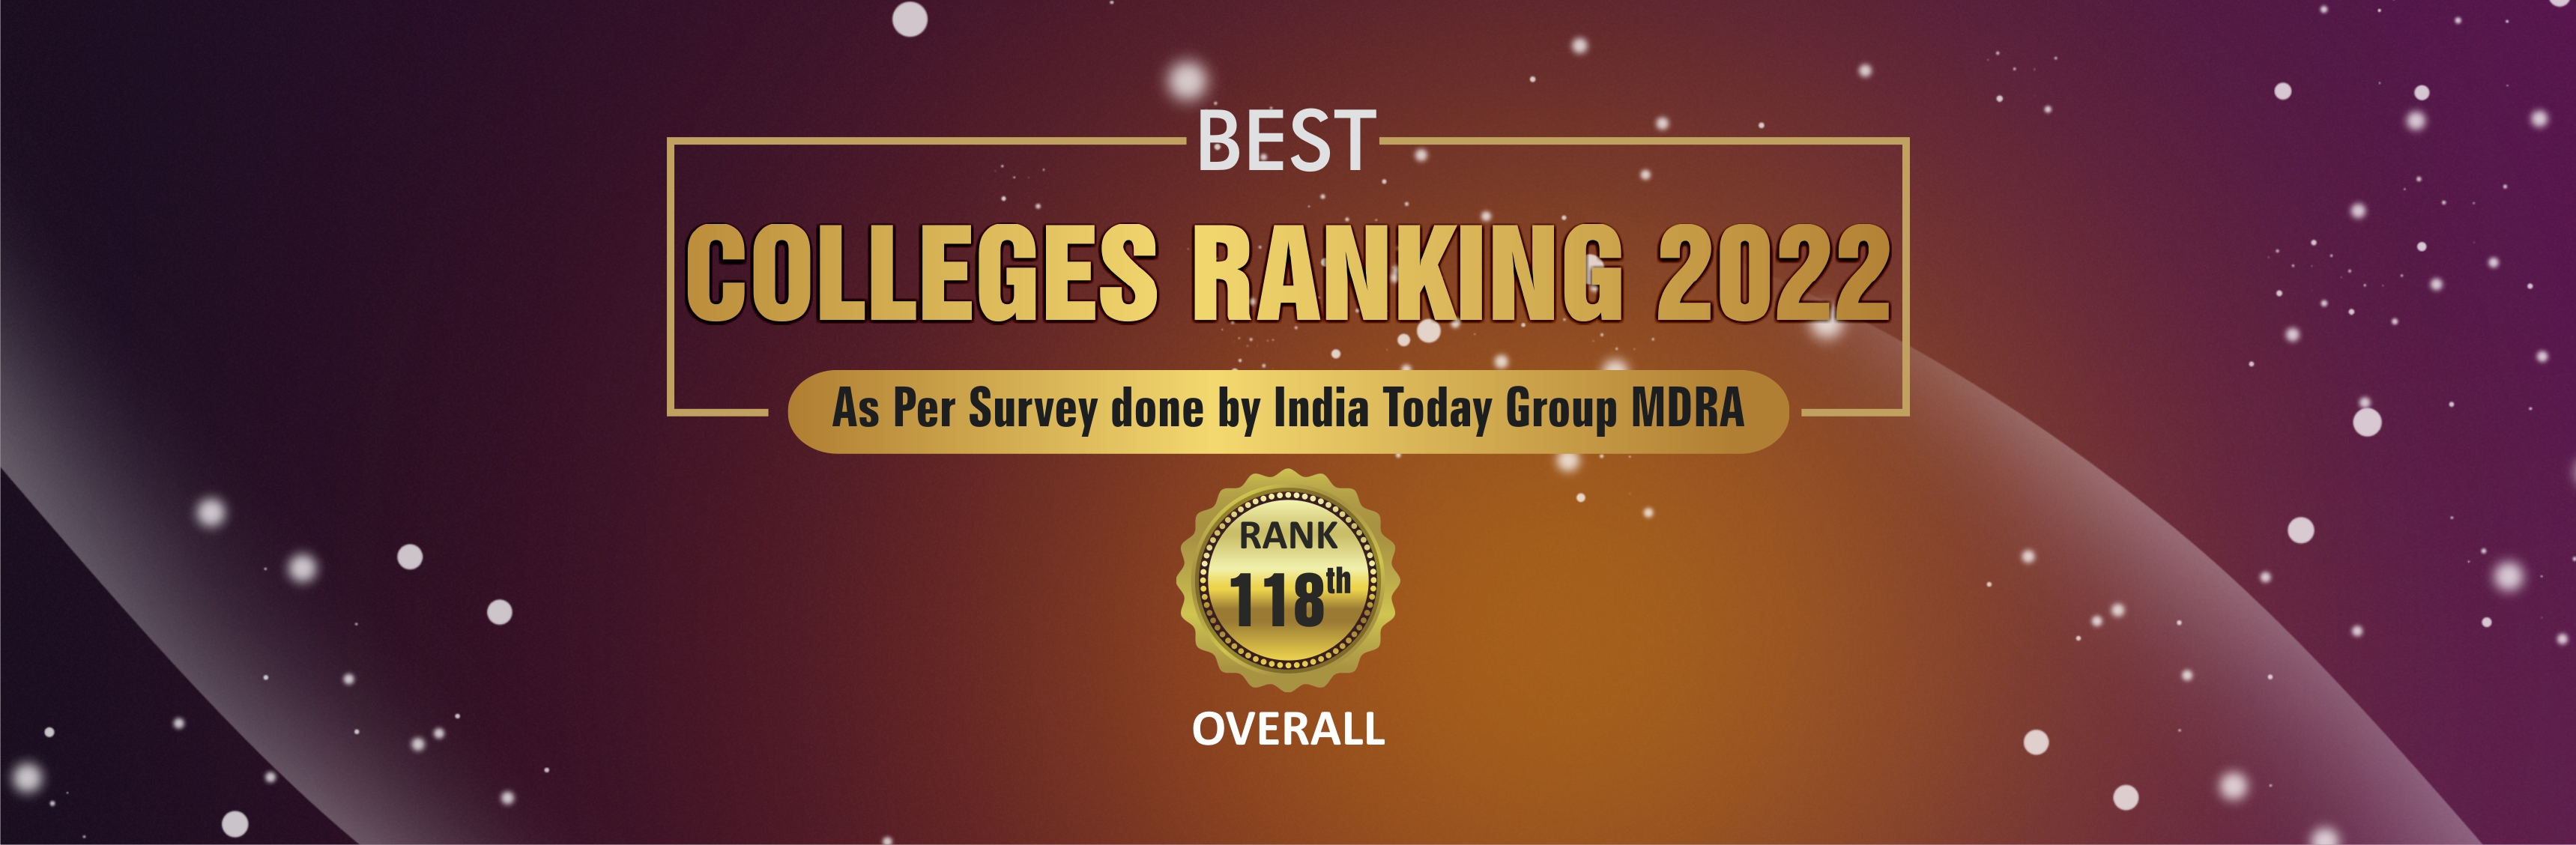 India-today-Group-MDRA-Best-colleges-ranking-2022